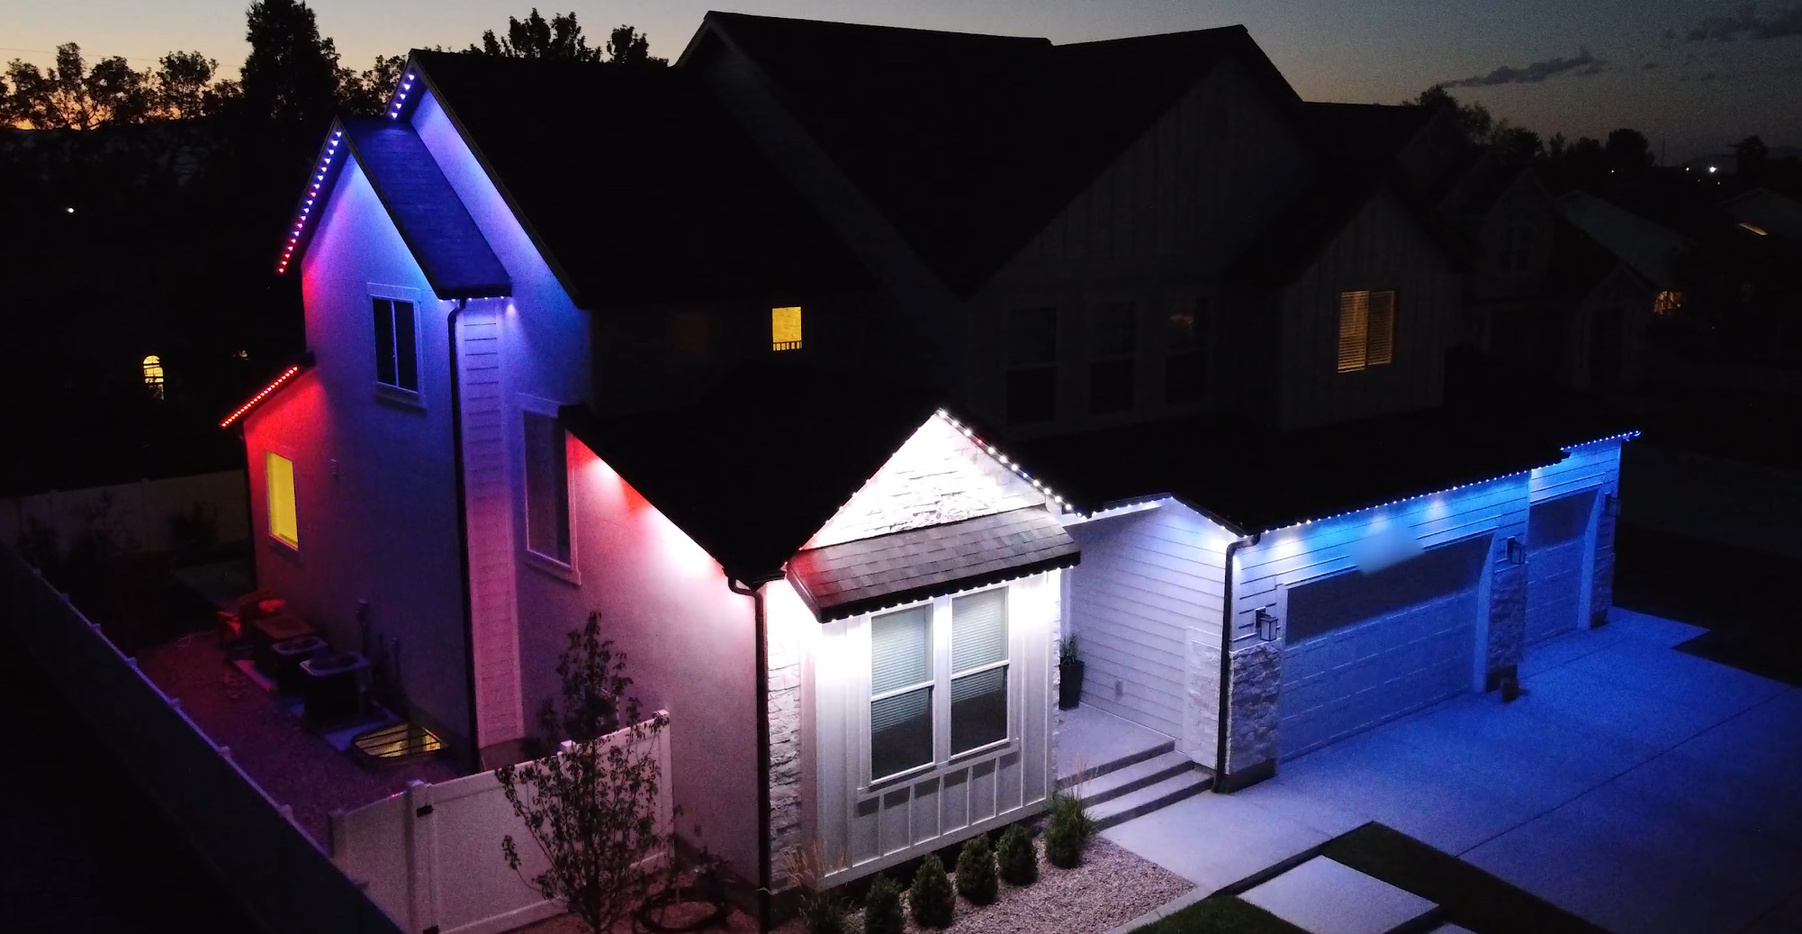 a house is lit up with red and blue lights
permanent holiday light
Utah LED Holiday Salt Lake City Christmas Festive Home